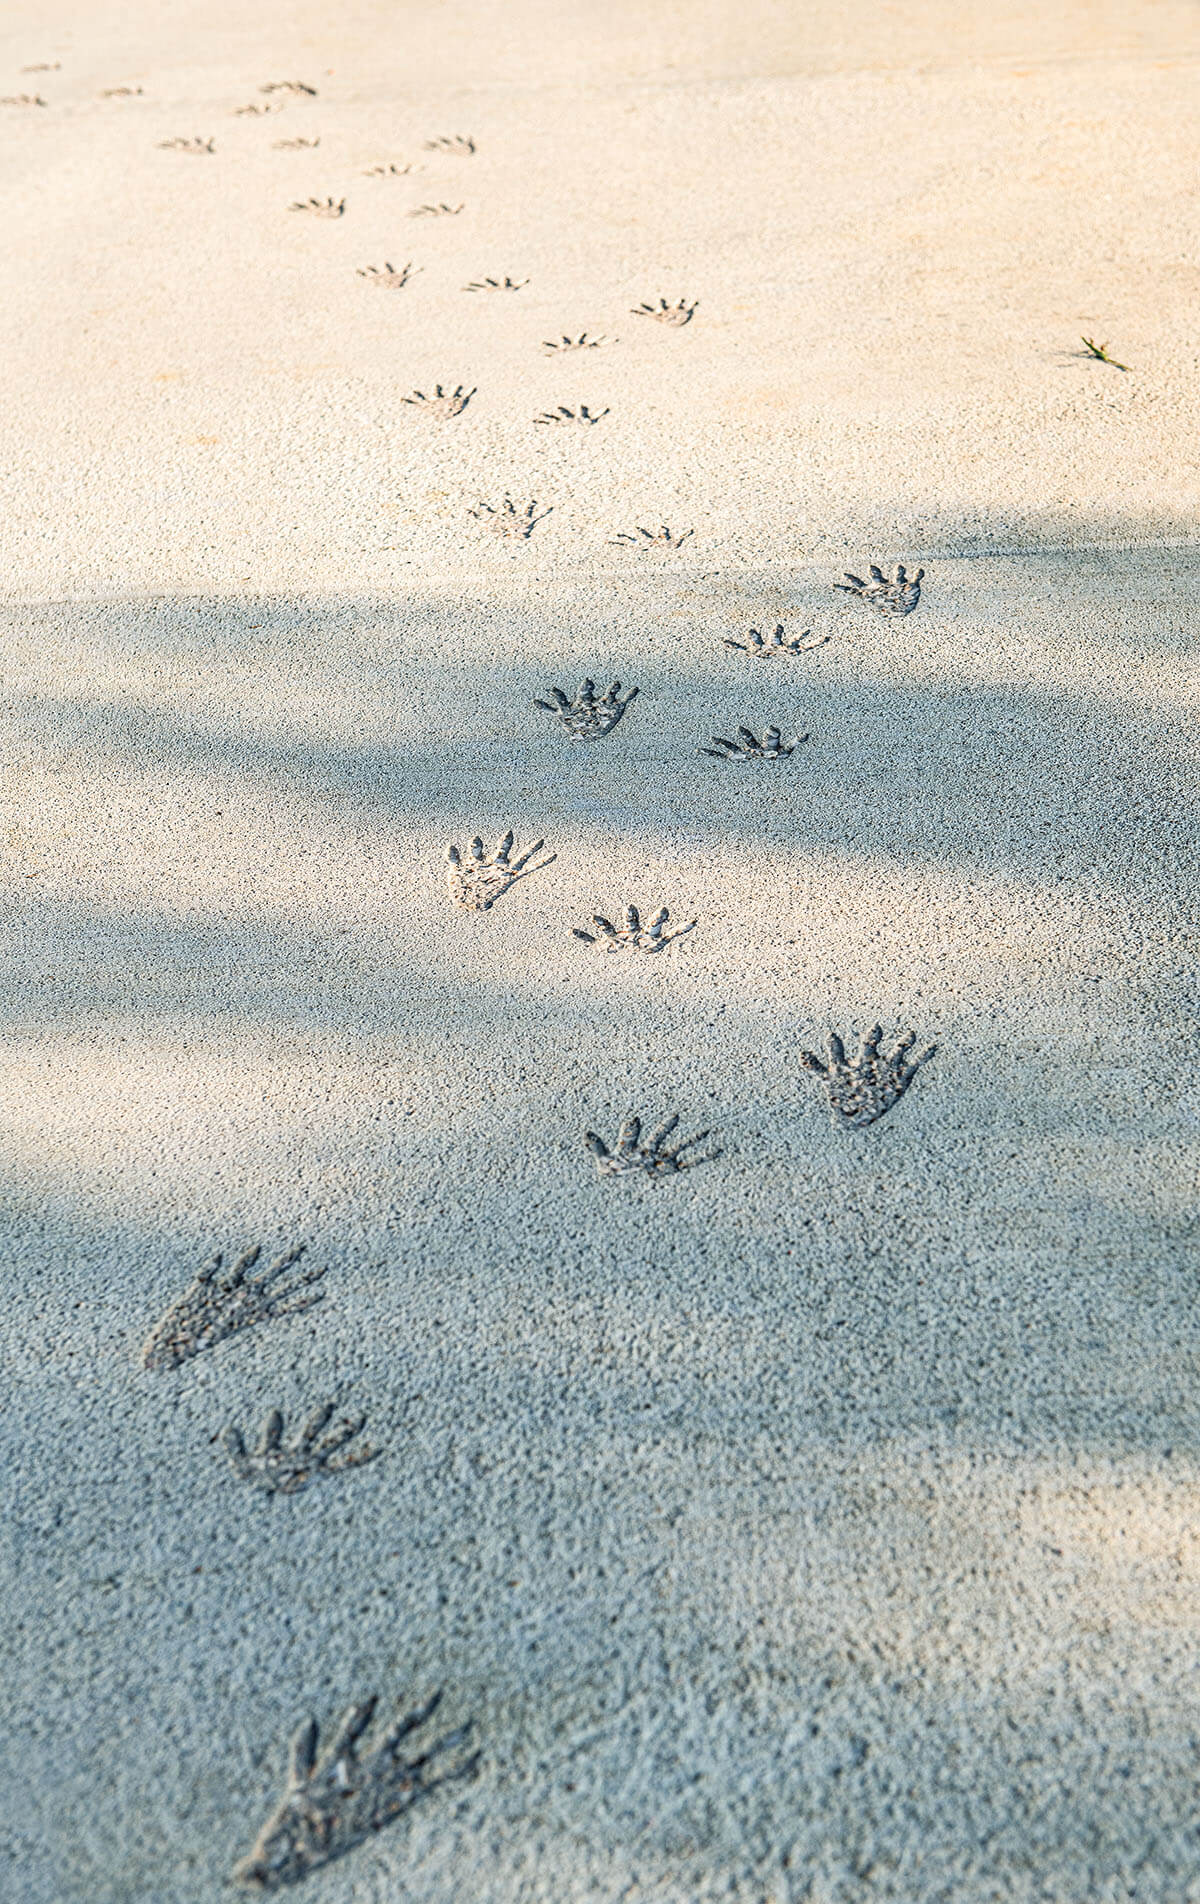 Footprints are visible along gray-colored sand